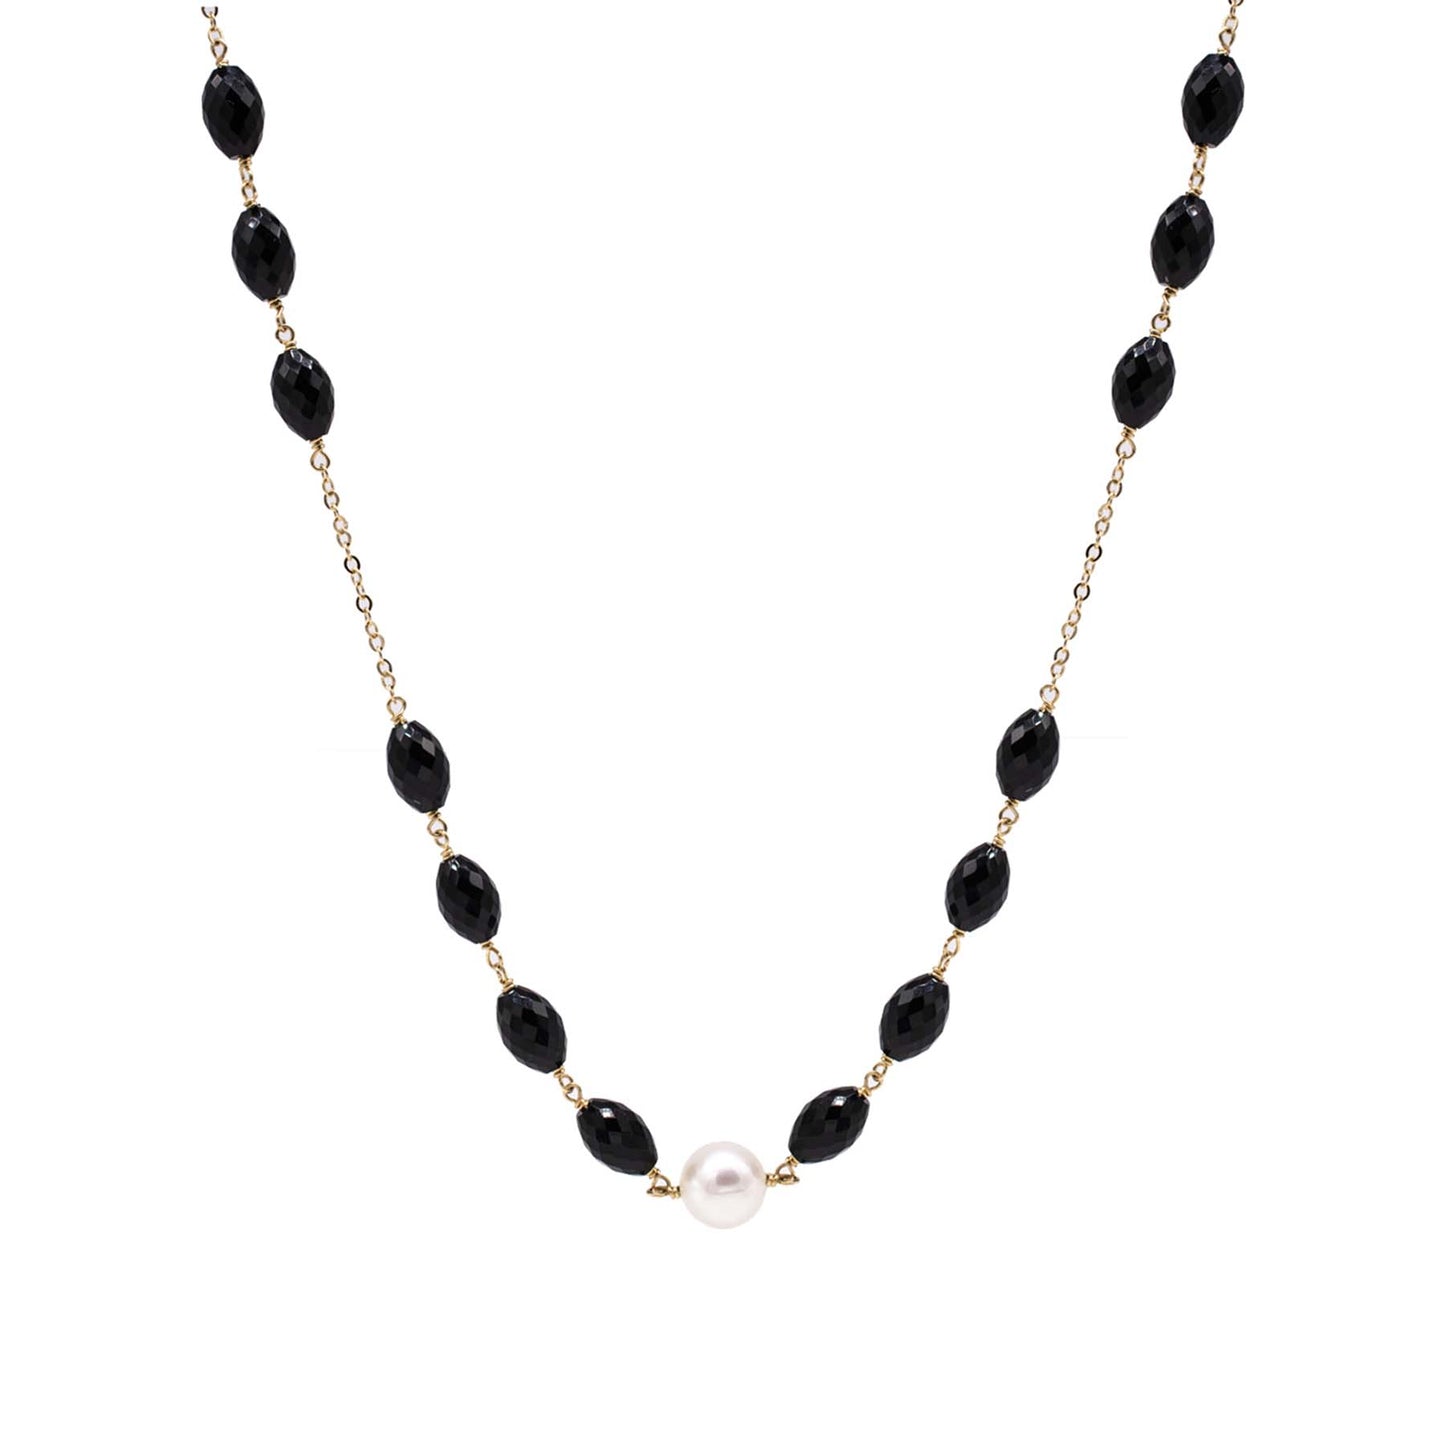 14k Black Onyx White Freshwater Pearl Link Necklace 18"